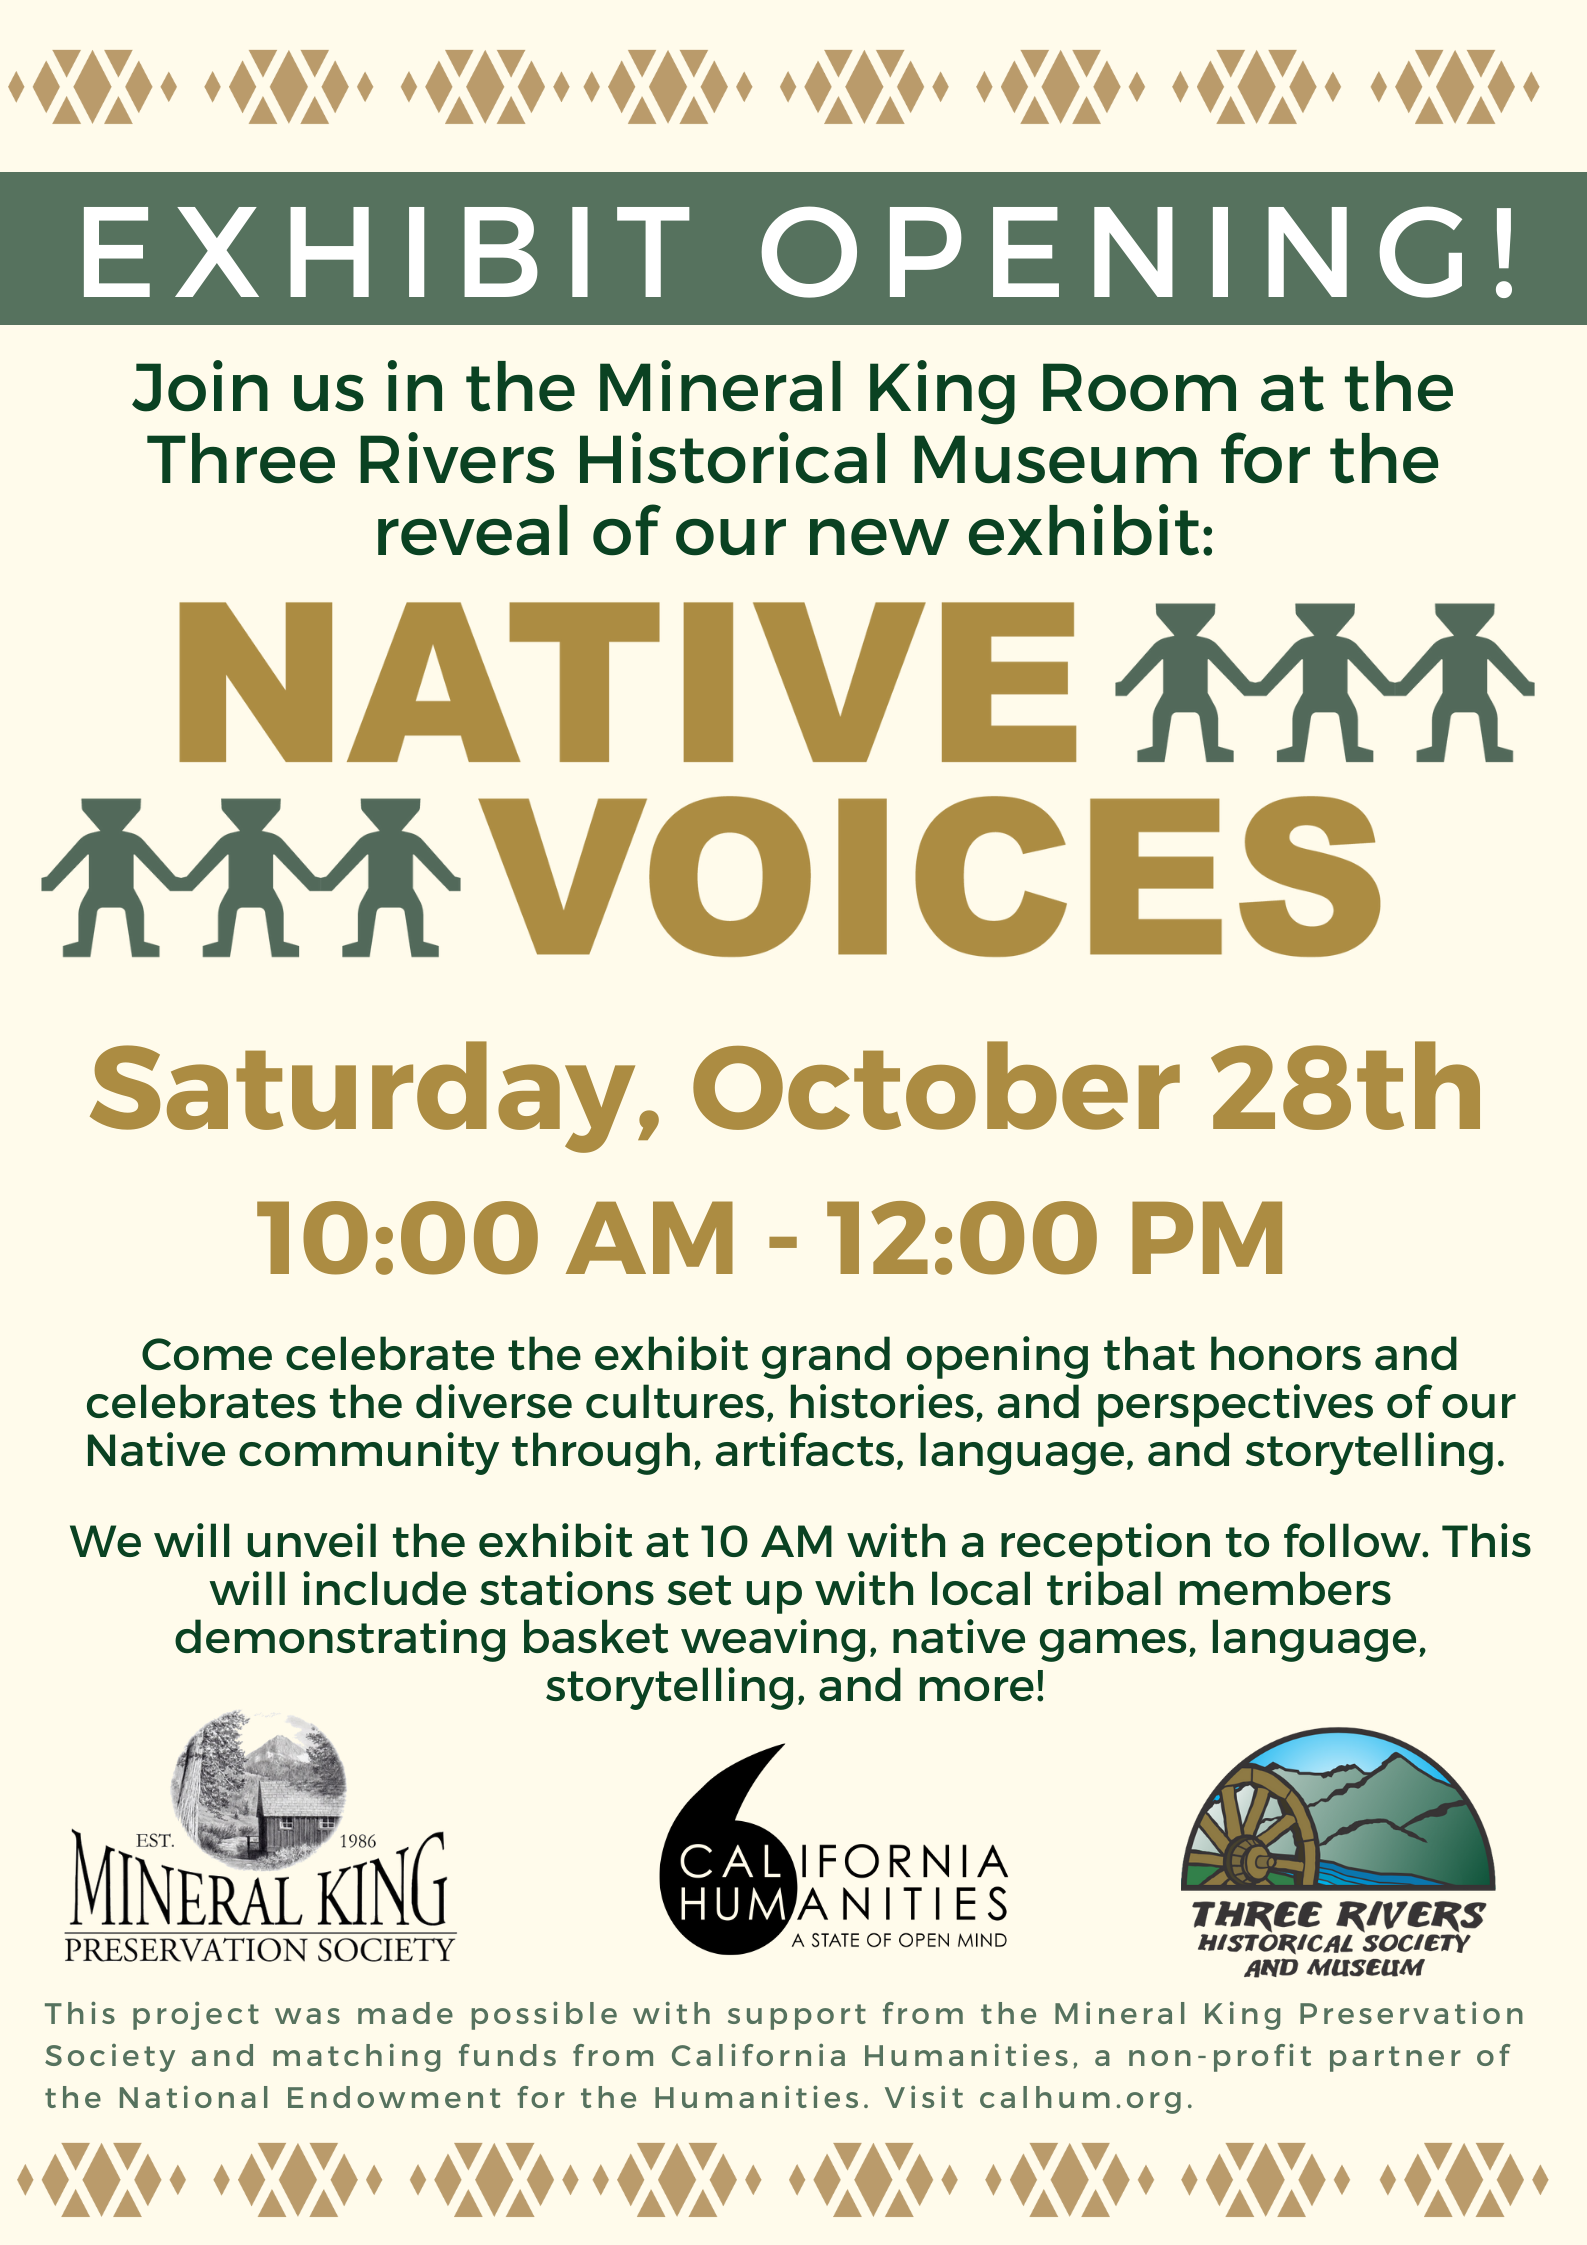 Flyer for Native Voices exhibit with opening information and sponsor logos